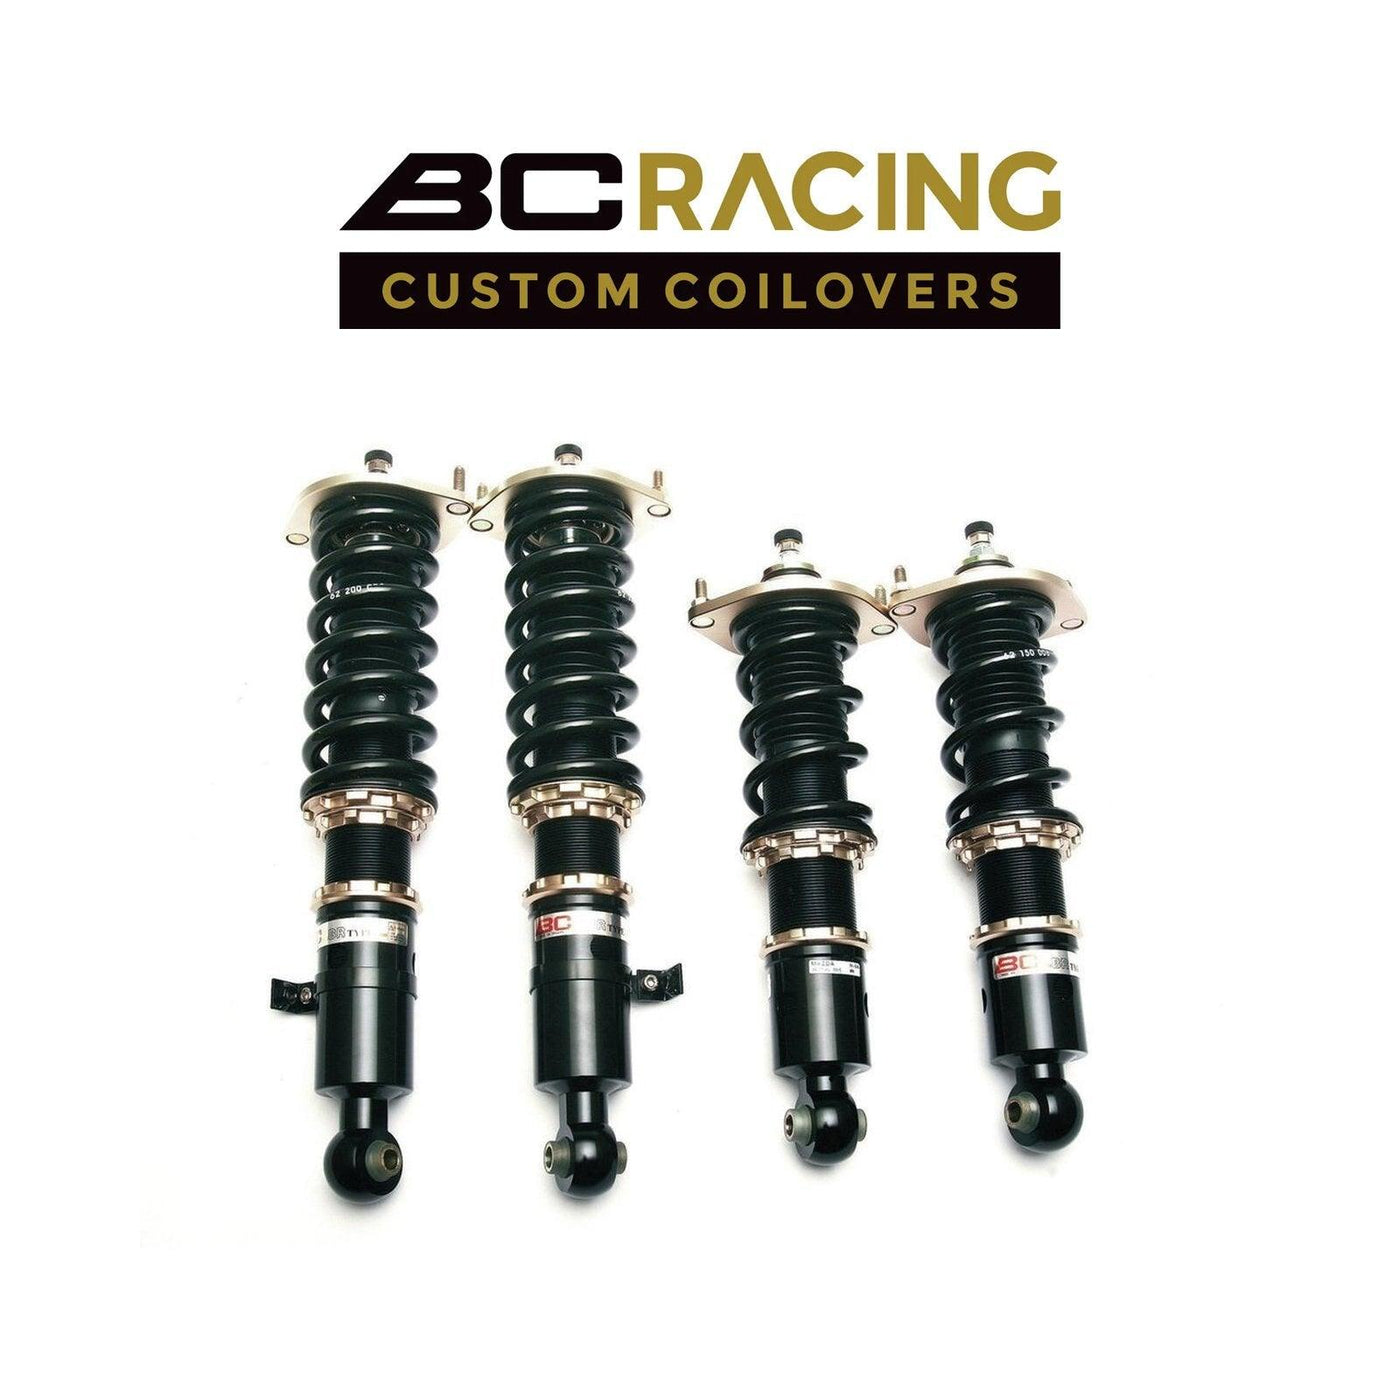 BC Racing Coilovers 2015 INFINITI Q40 - Attacking the Clock Racing